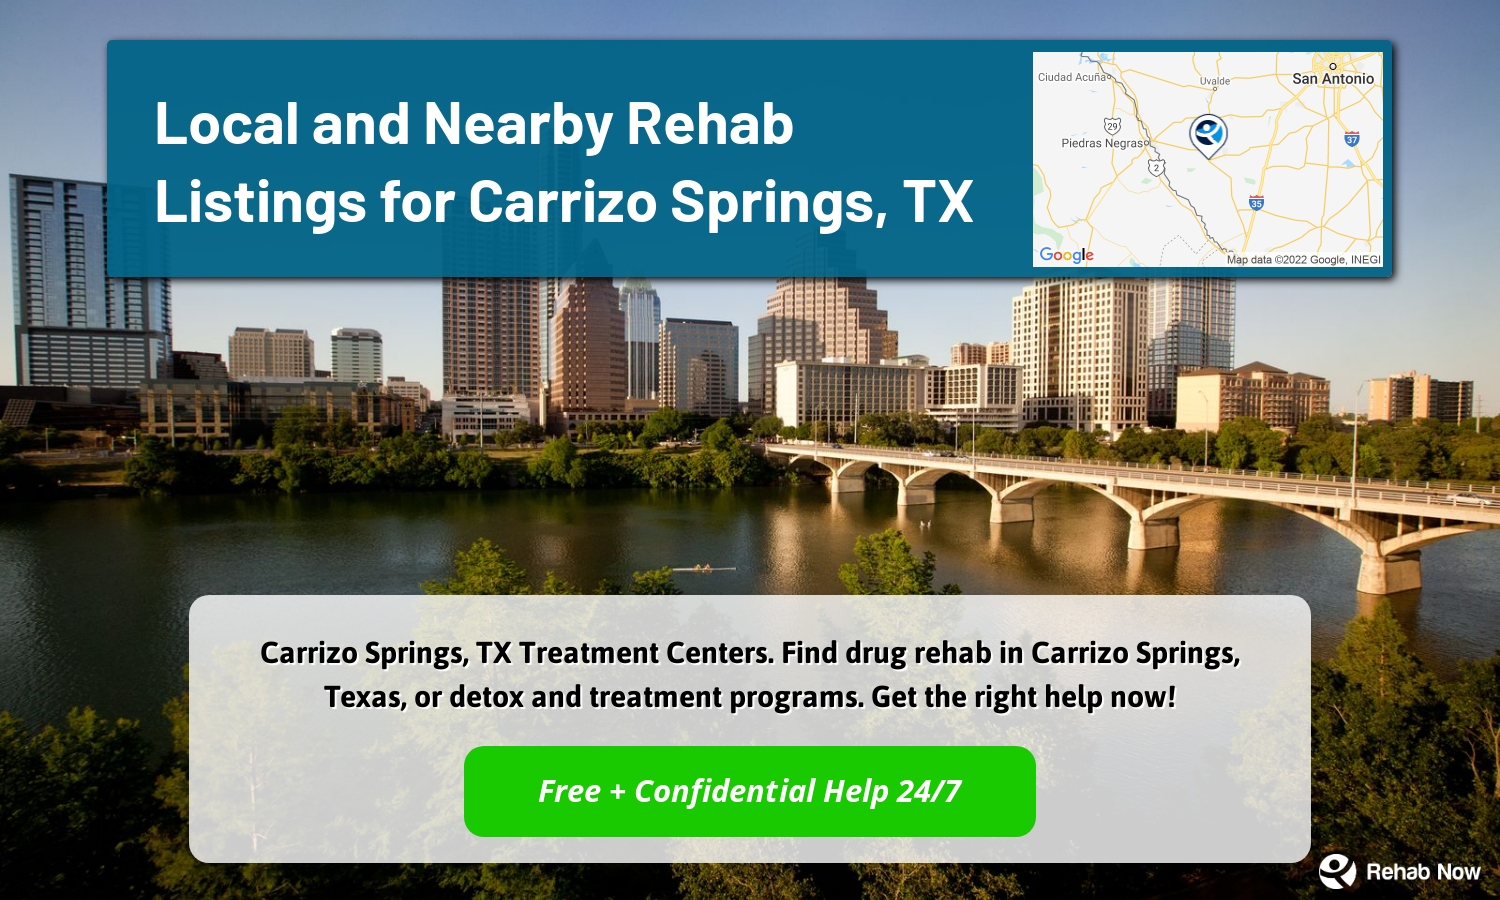 Carrizo Springs, TX Treatment Centers. Find drug rehab in Carrizo Springs, Texas, or detox and treatment programs. Get the right help now!